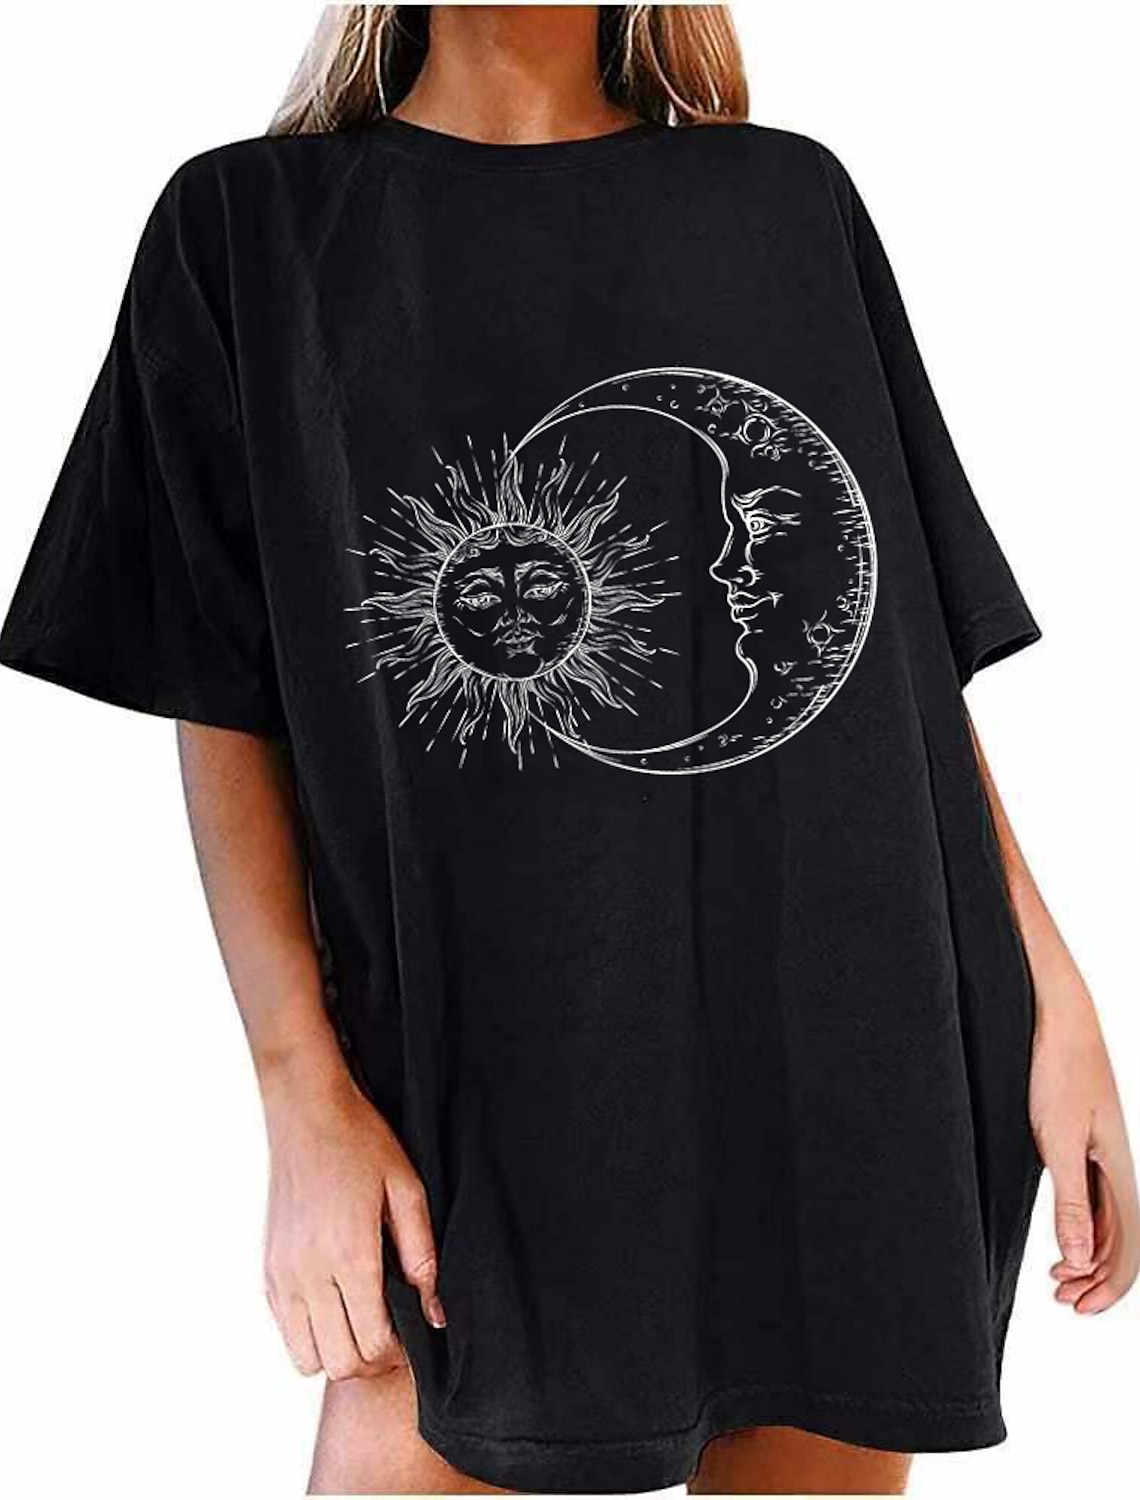 AODONG Summer Tops for Women Trendy Women's Casual Dandelion Printing Tunic Tees Loose Blouses Funny Graphic T-Shirts 